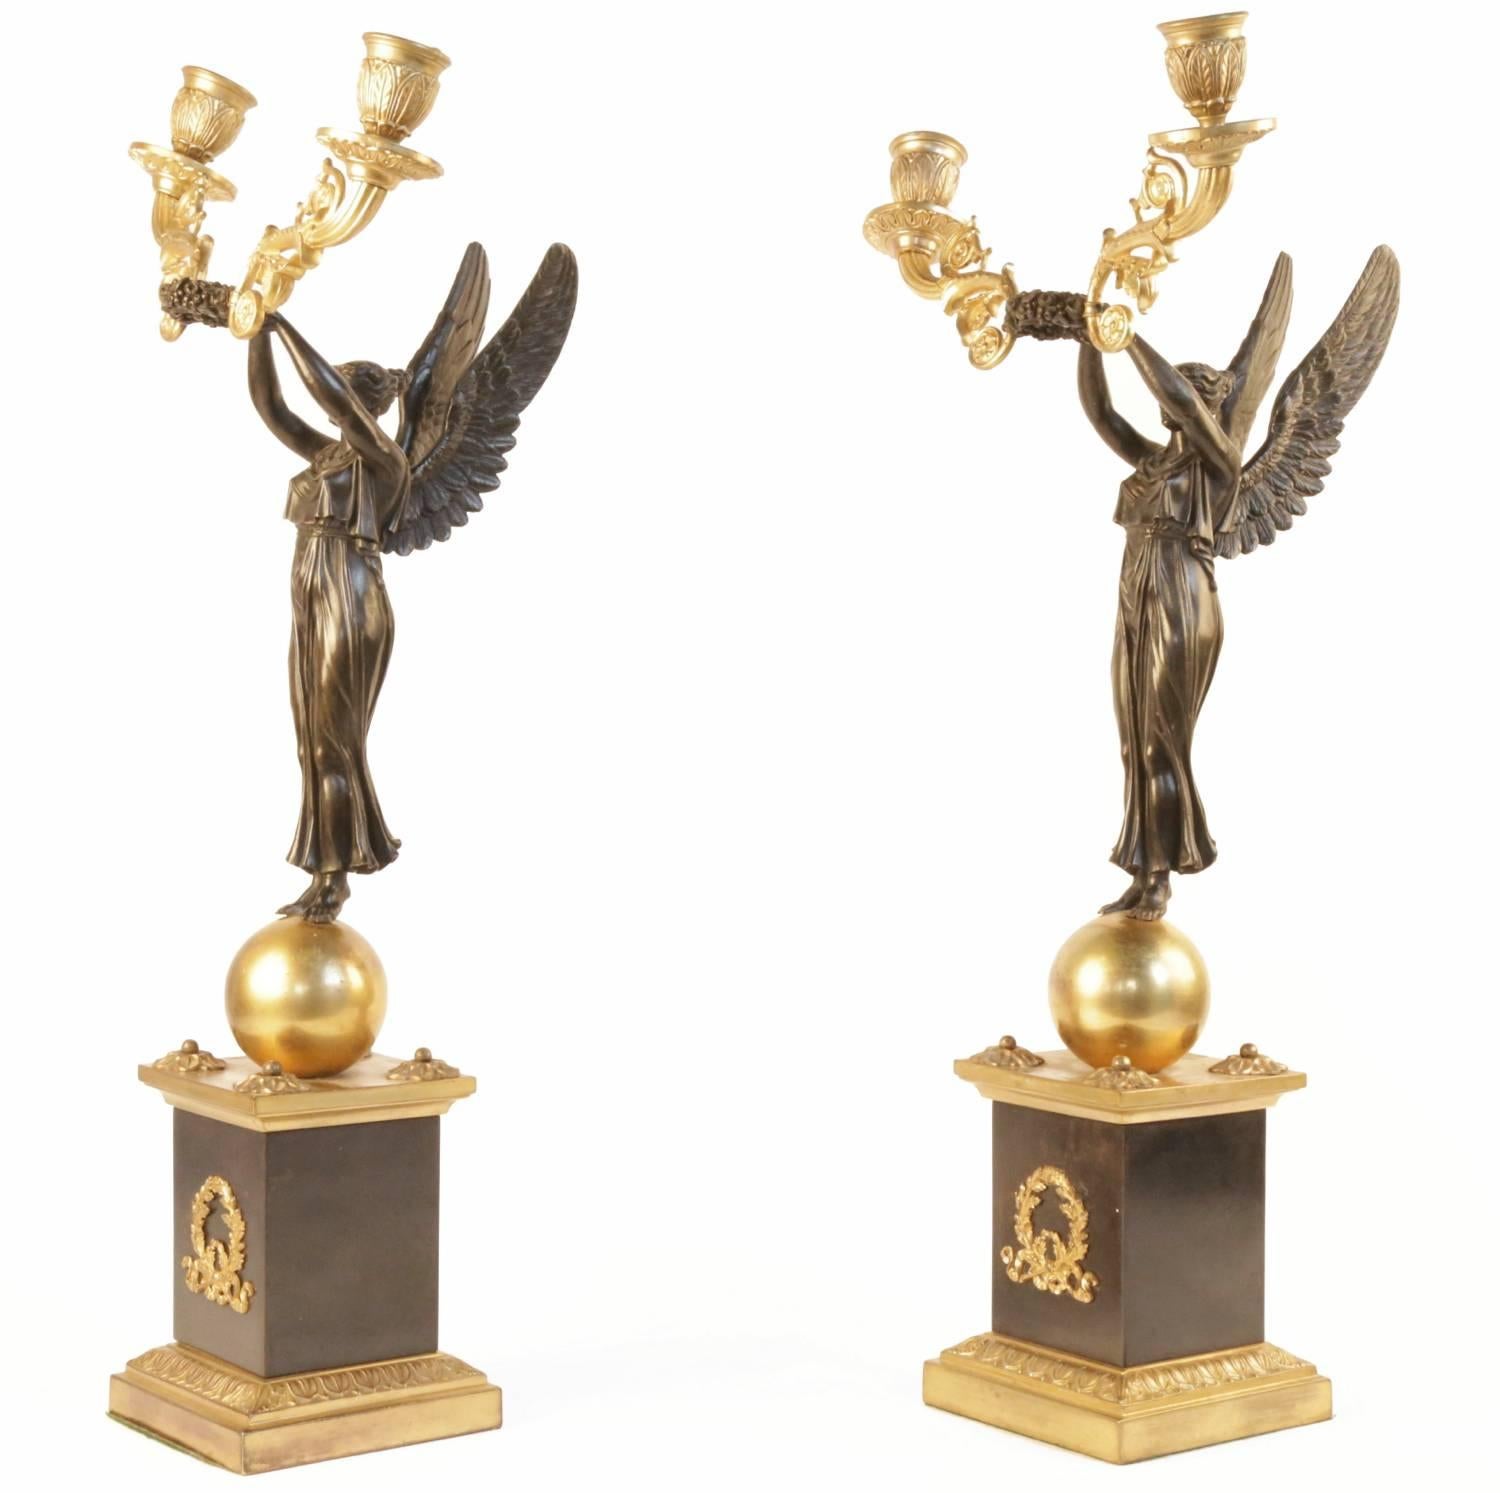 Pair of Early 19th Century Empire Bronze and Gilt Candelabra For Sale 2